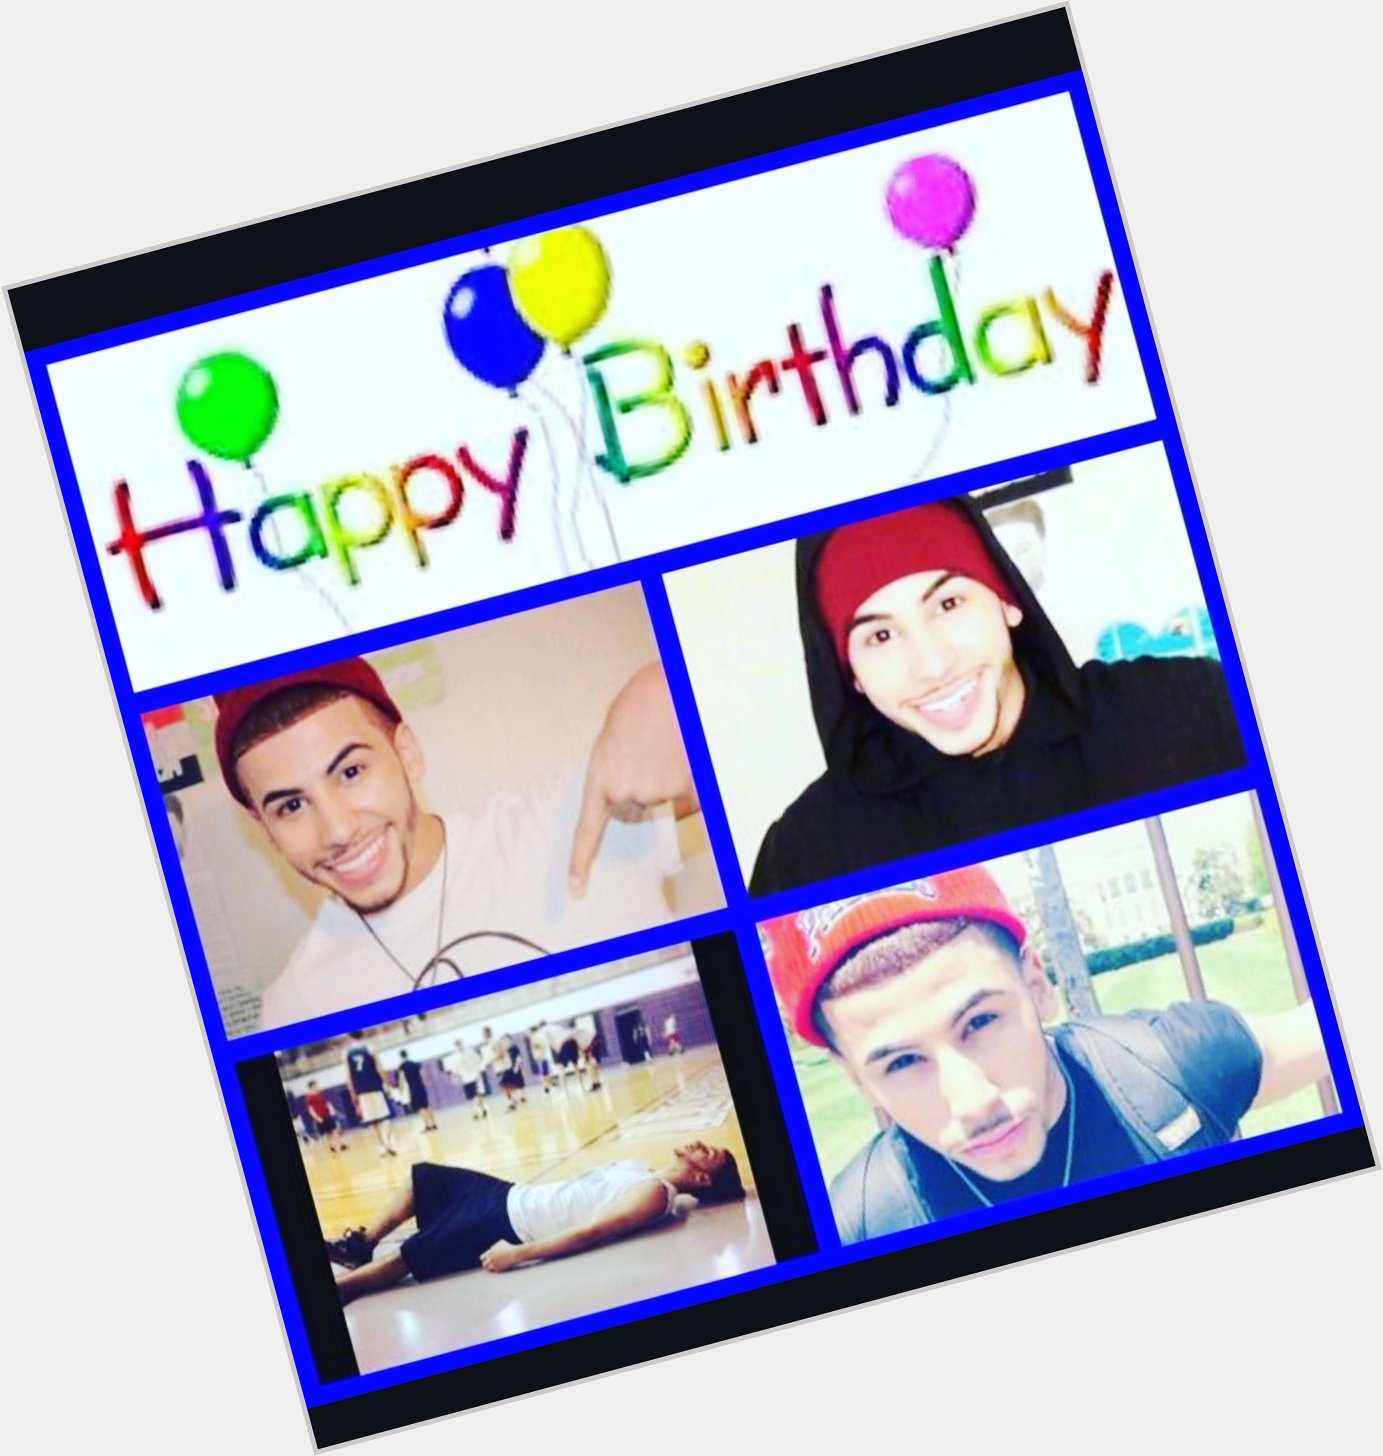 Happy birthday Adam saleh you are the best you always make me smile even when I am sad I love you    